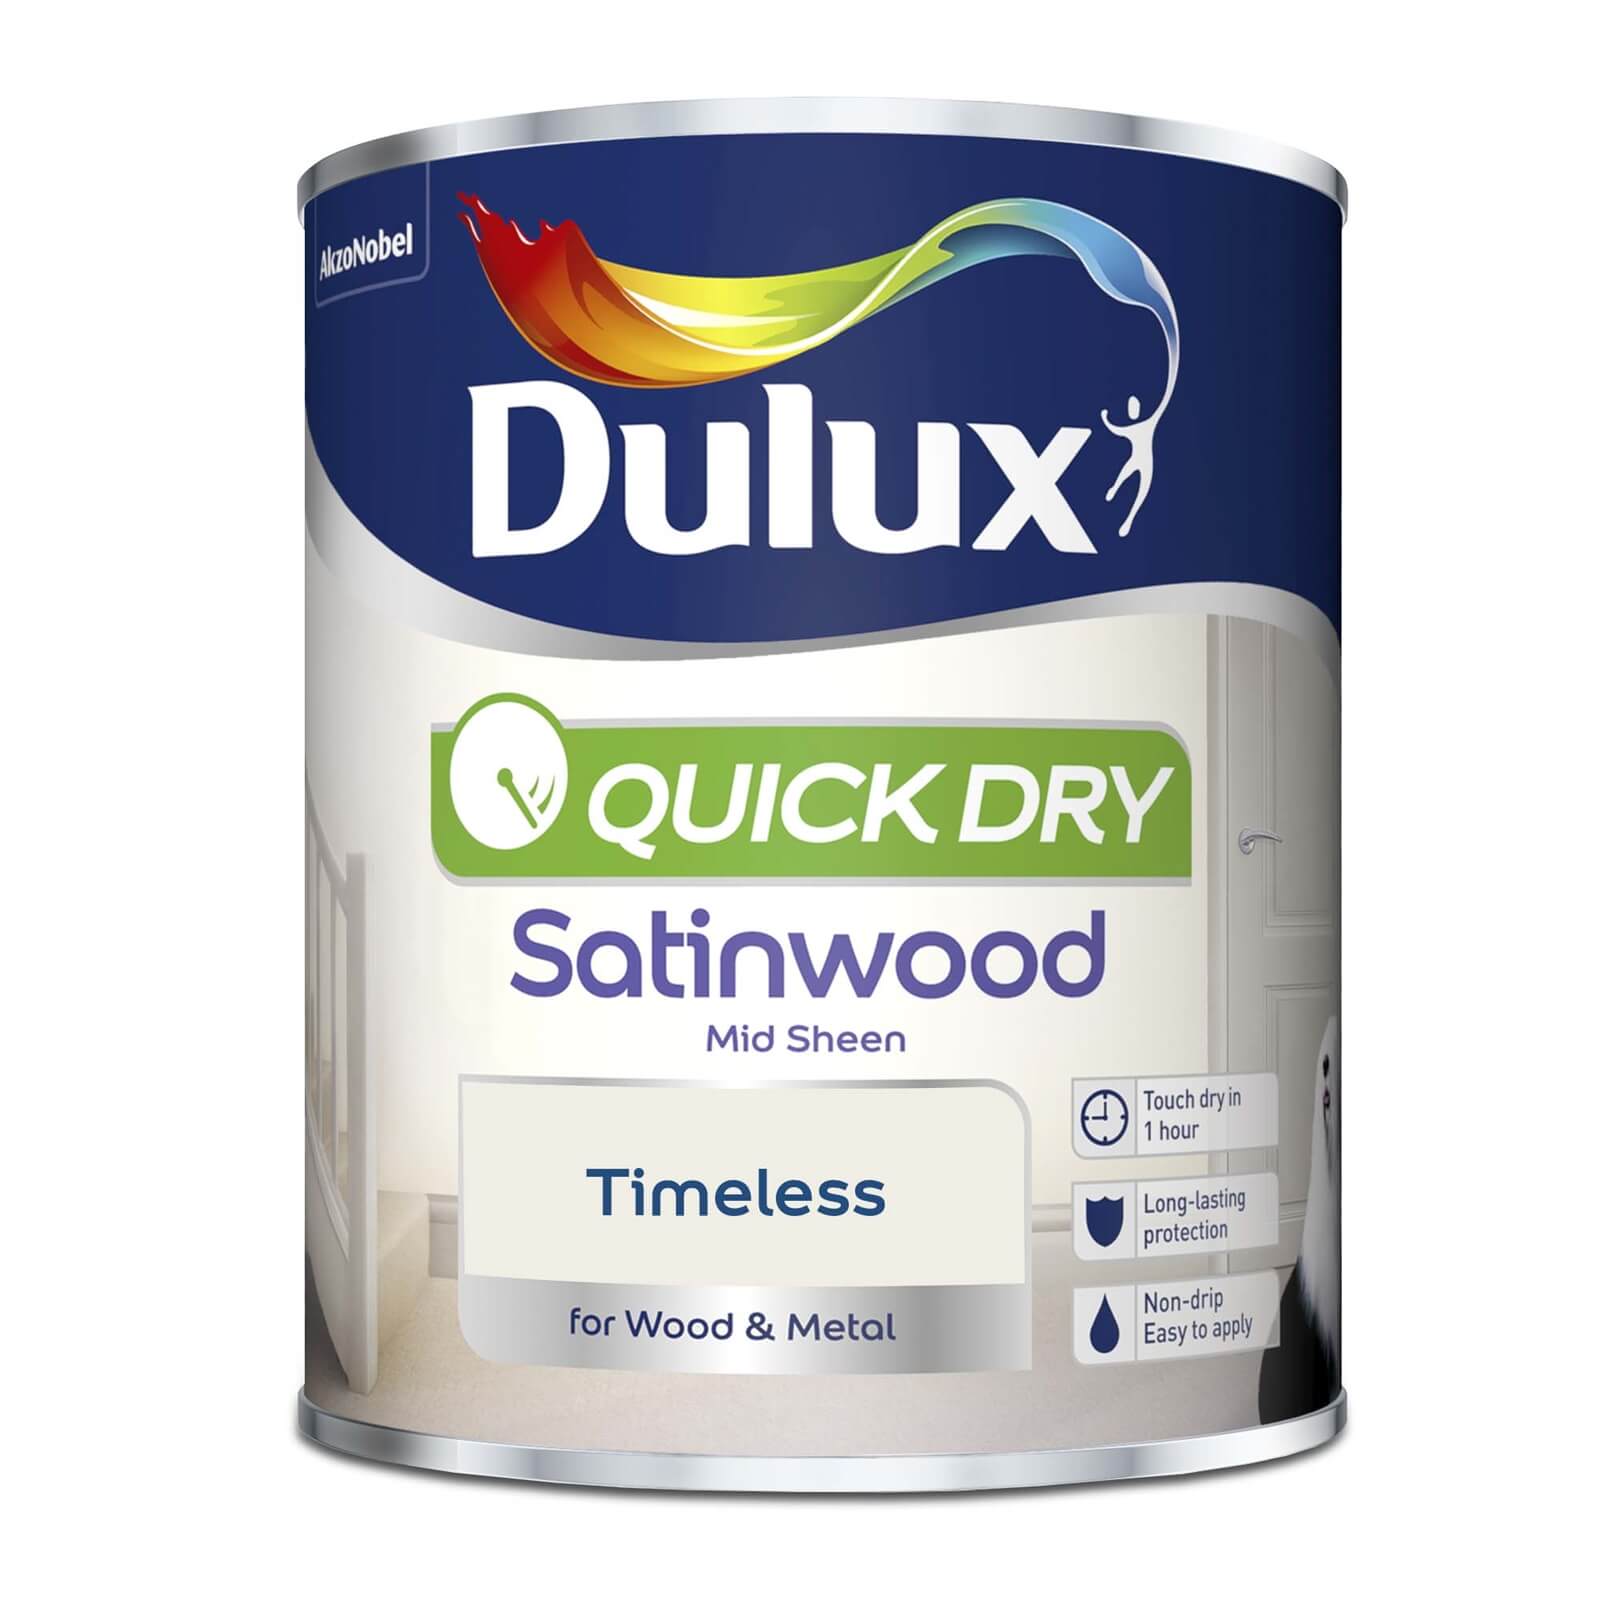 Dulux Quick Dry Satinwood Timeless - 750ml